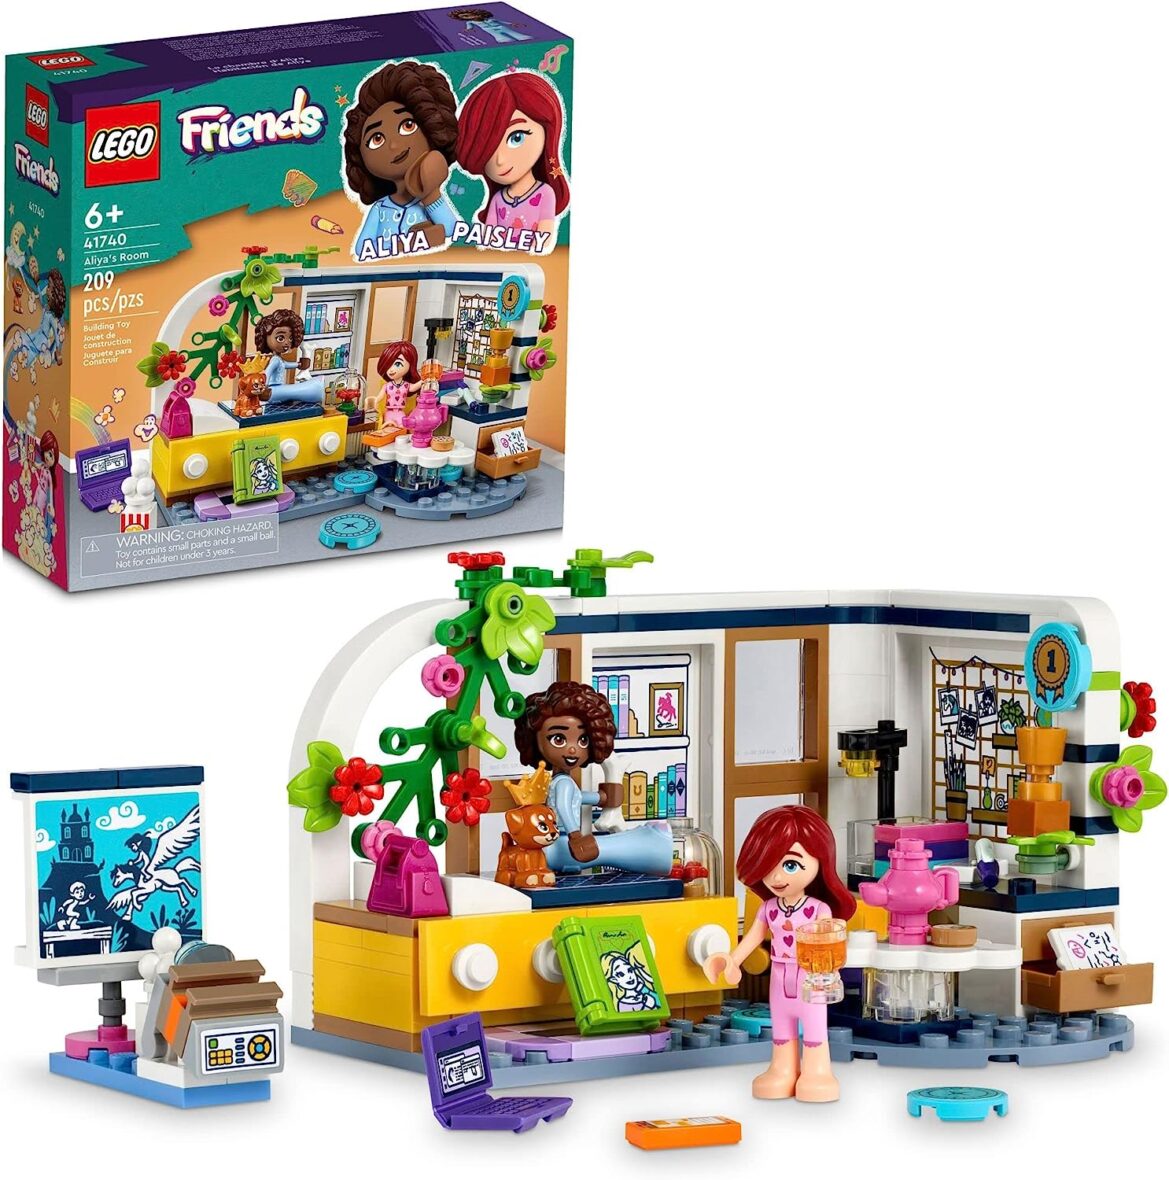 LEGO Friends Aliya’s Room Building Set 41740 Collectible Toy Set, Pretend Play Mini Sleepover Party Bedroom Playse